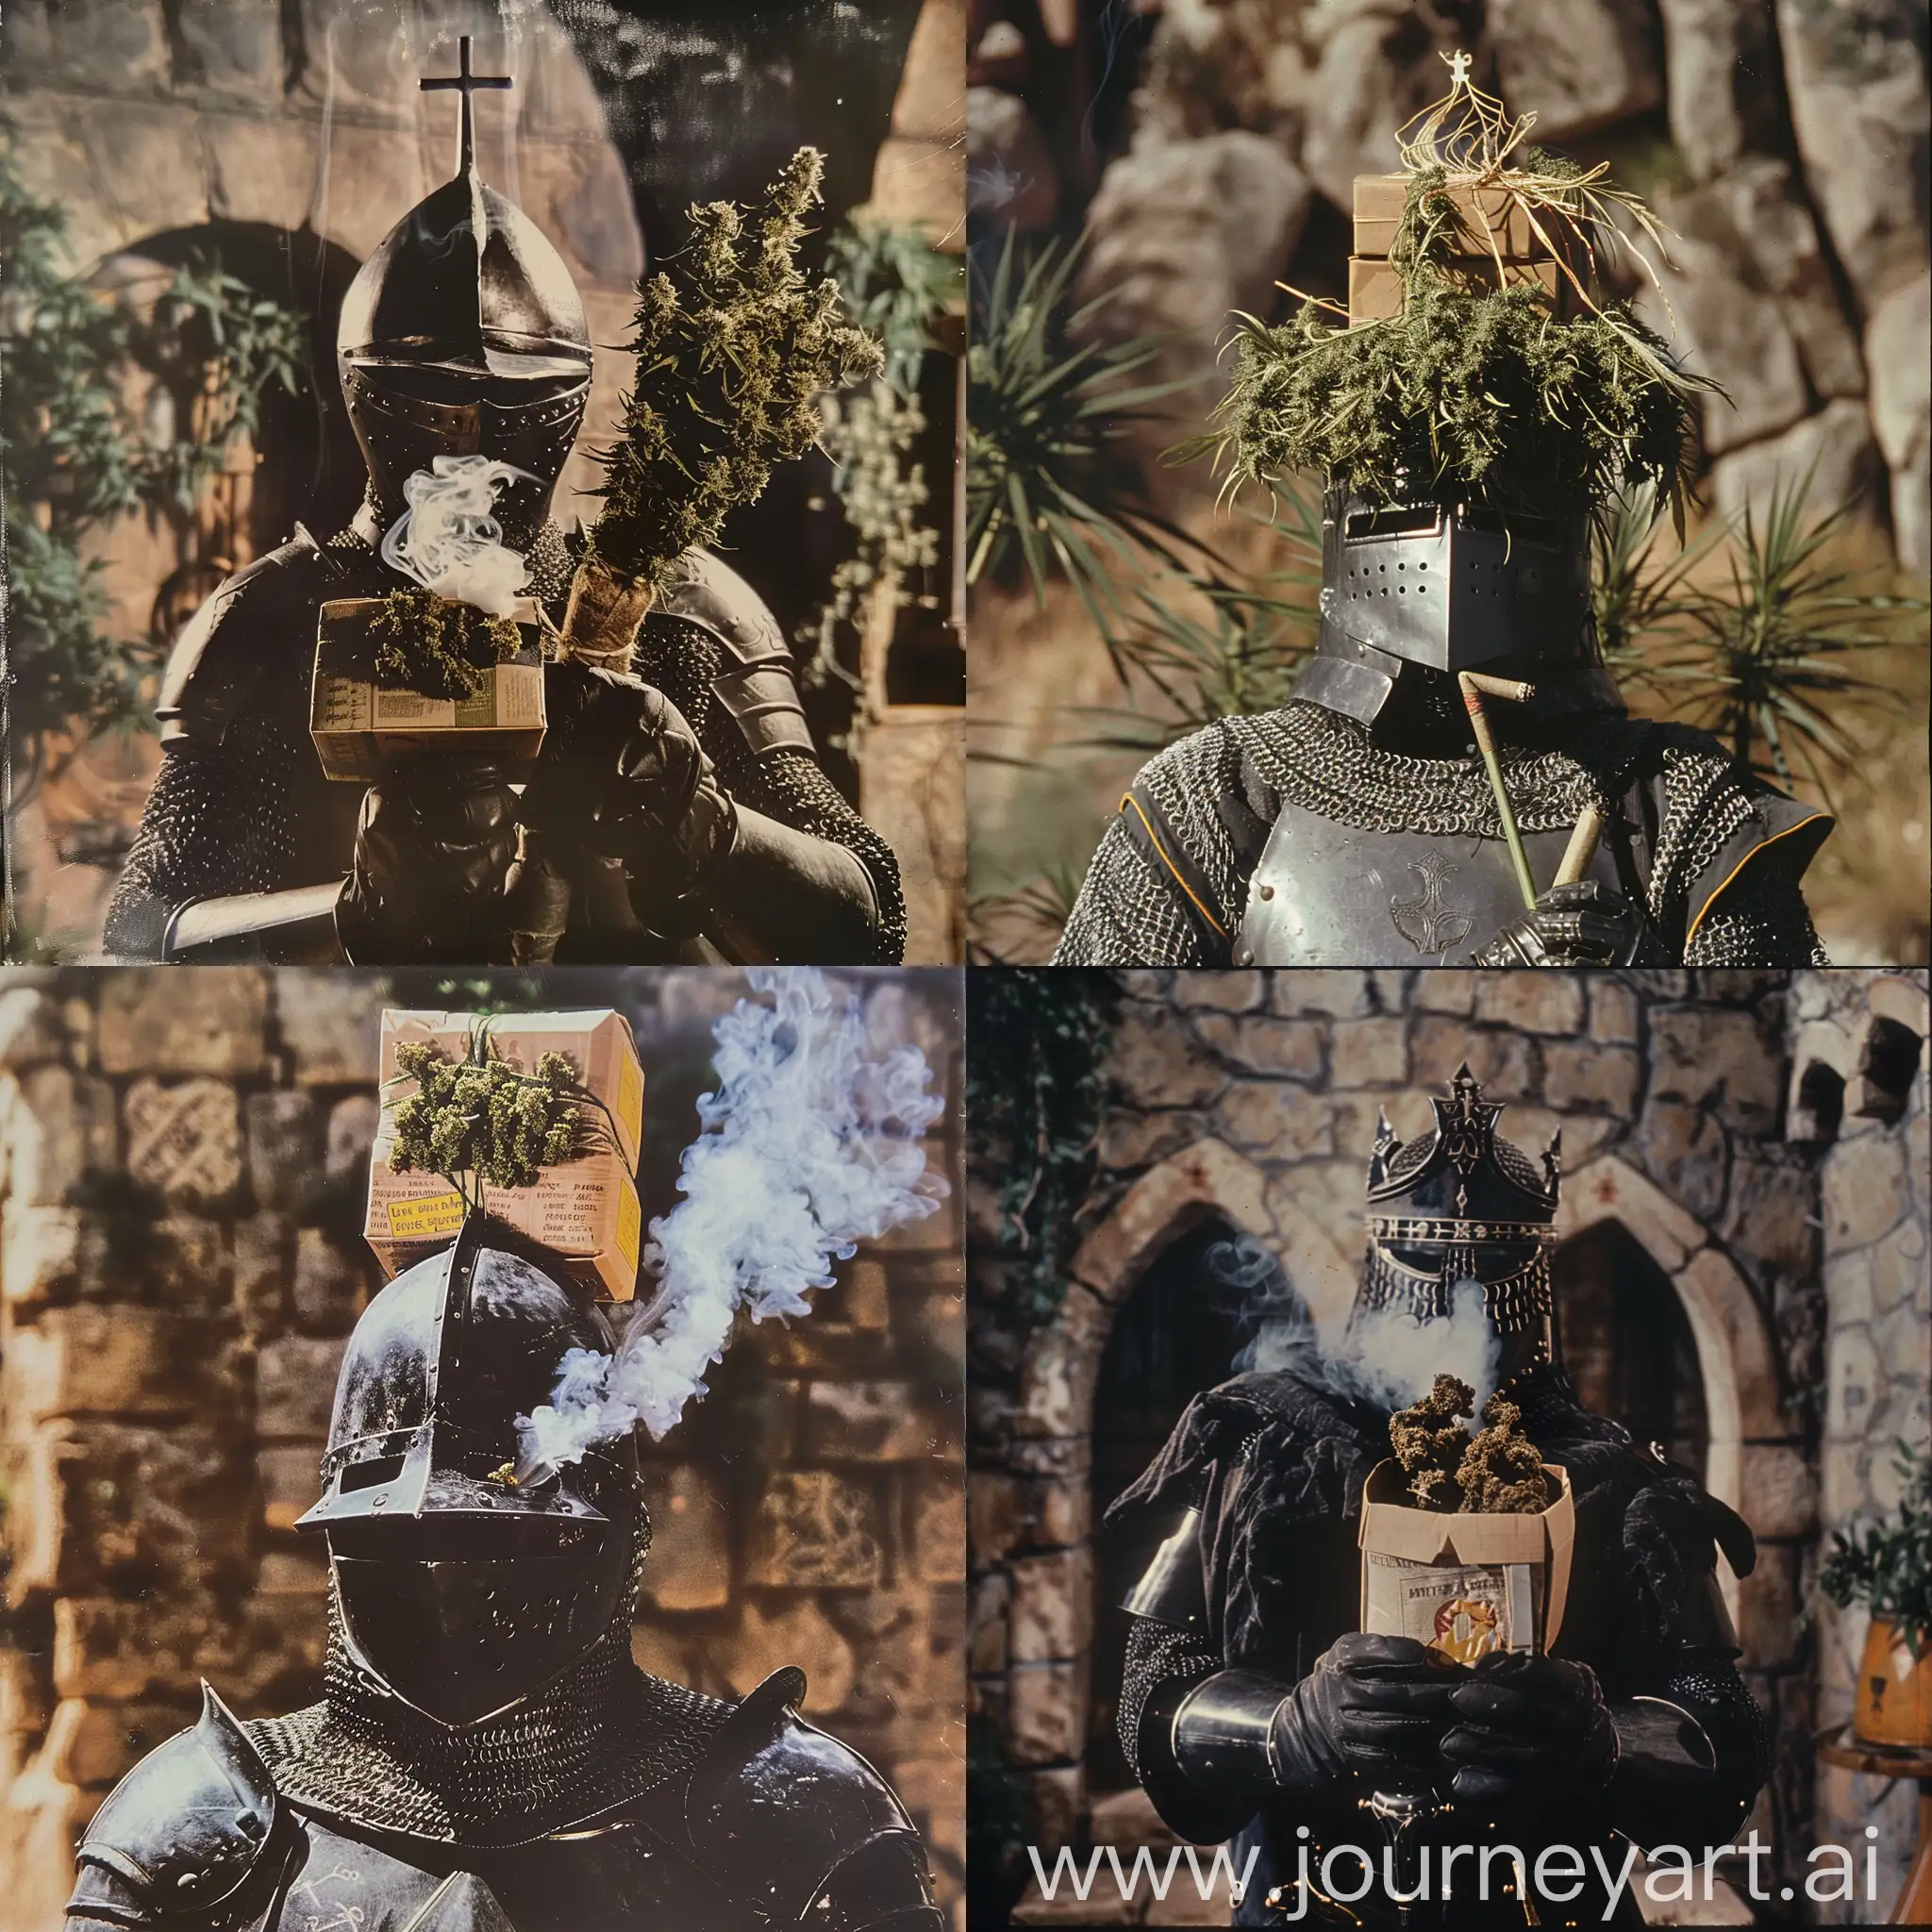 a frame from an 70s fantasy movie depicting The Black Knight (from Monty Python and the Holy grail) smoking a package of weed through his tophelm helmet. 